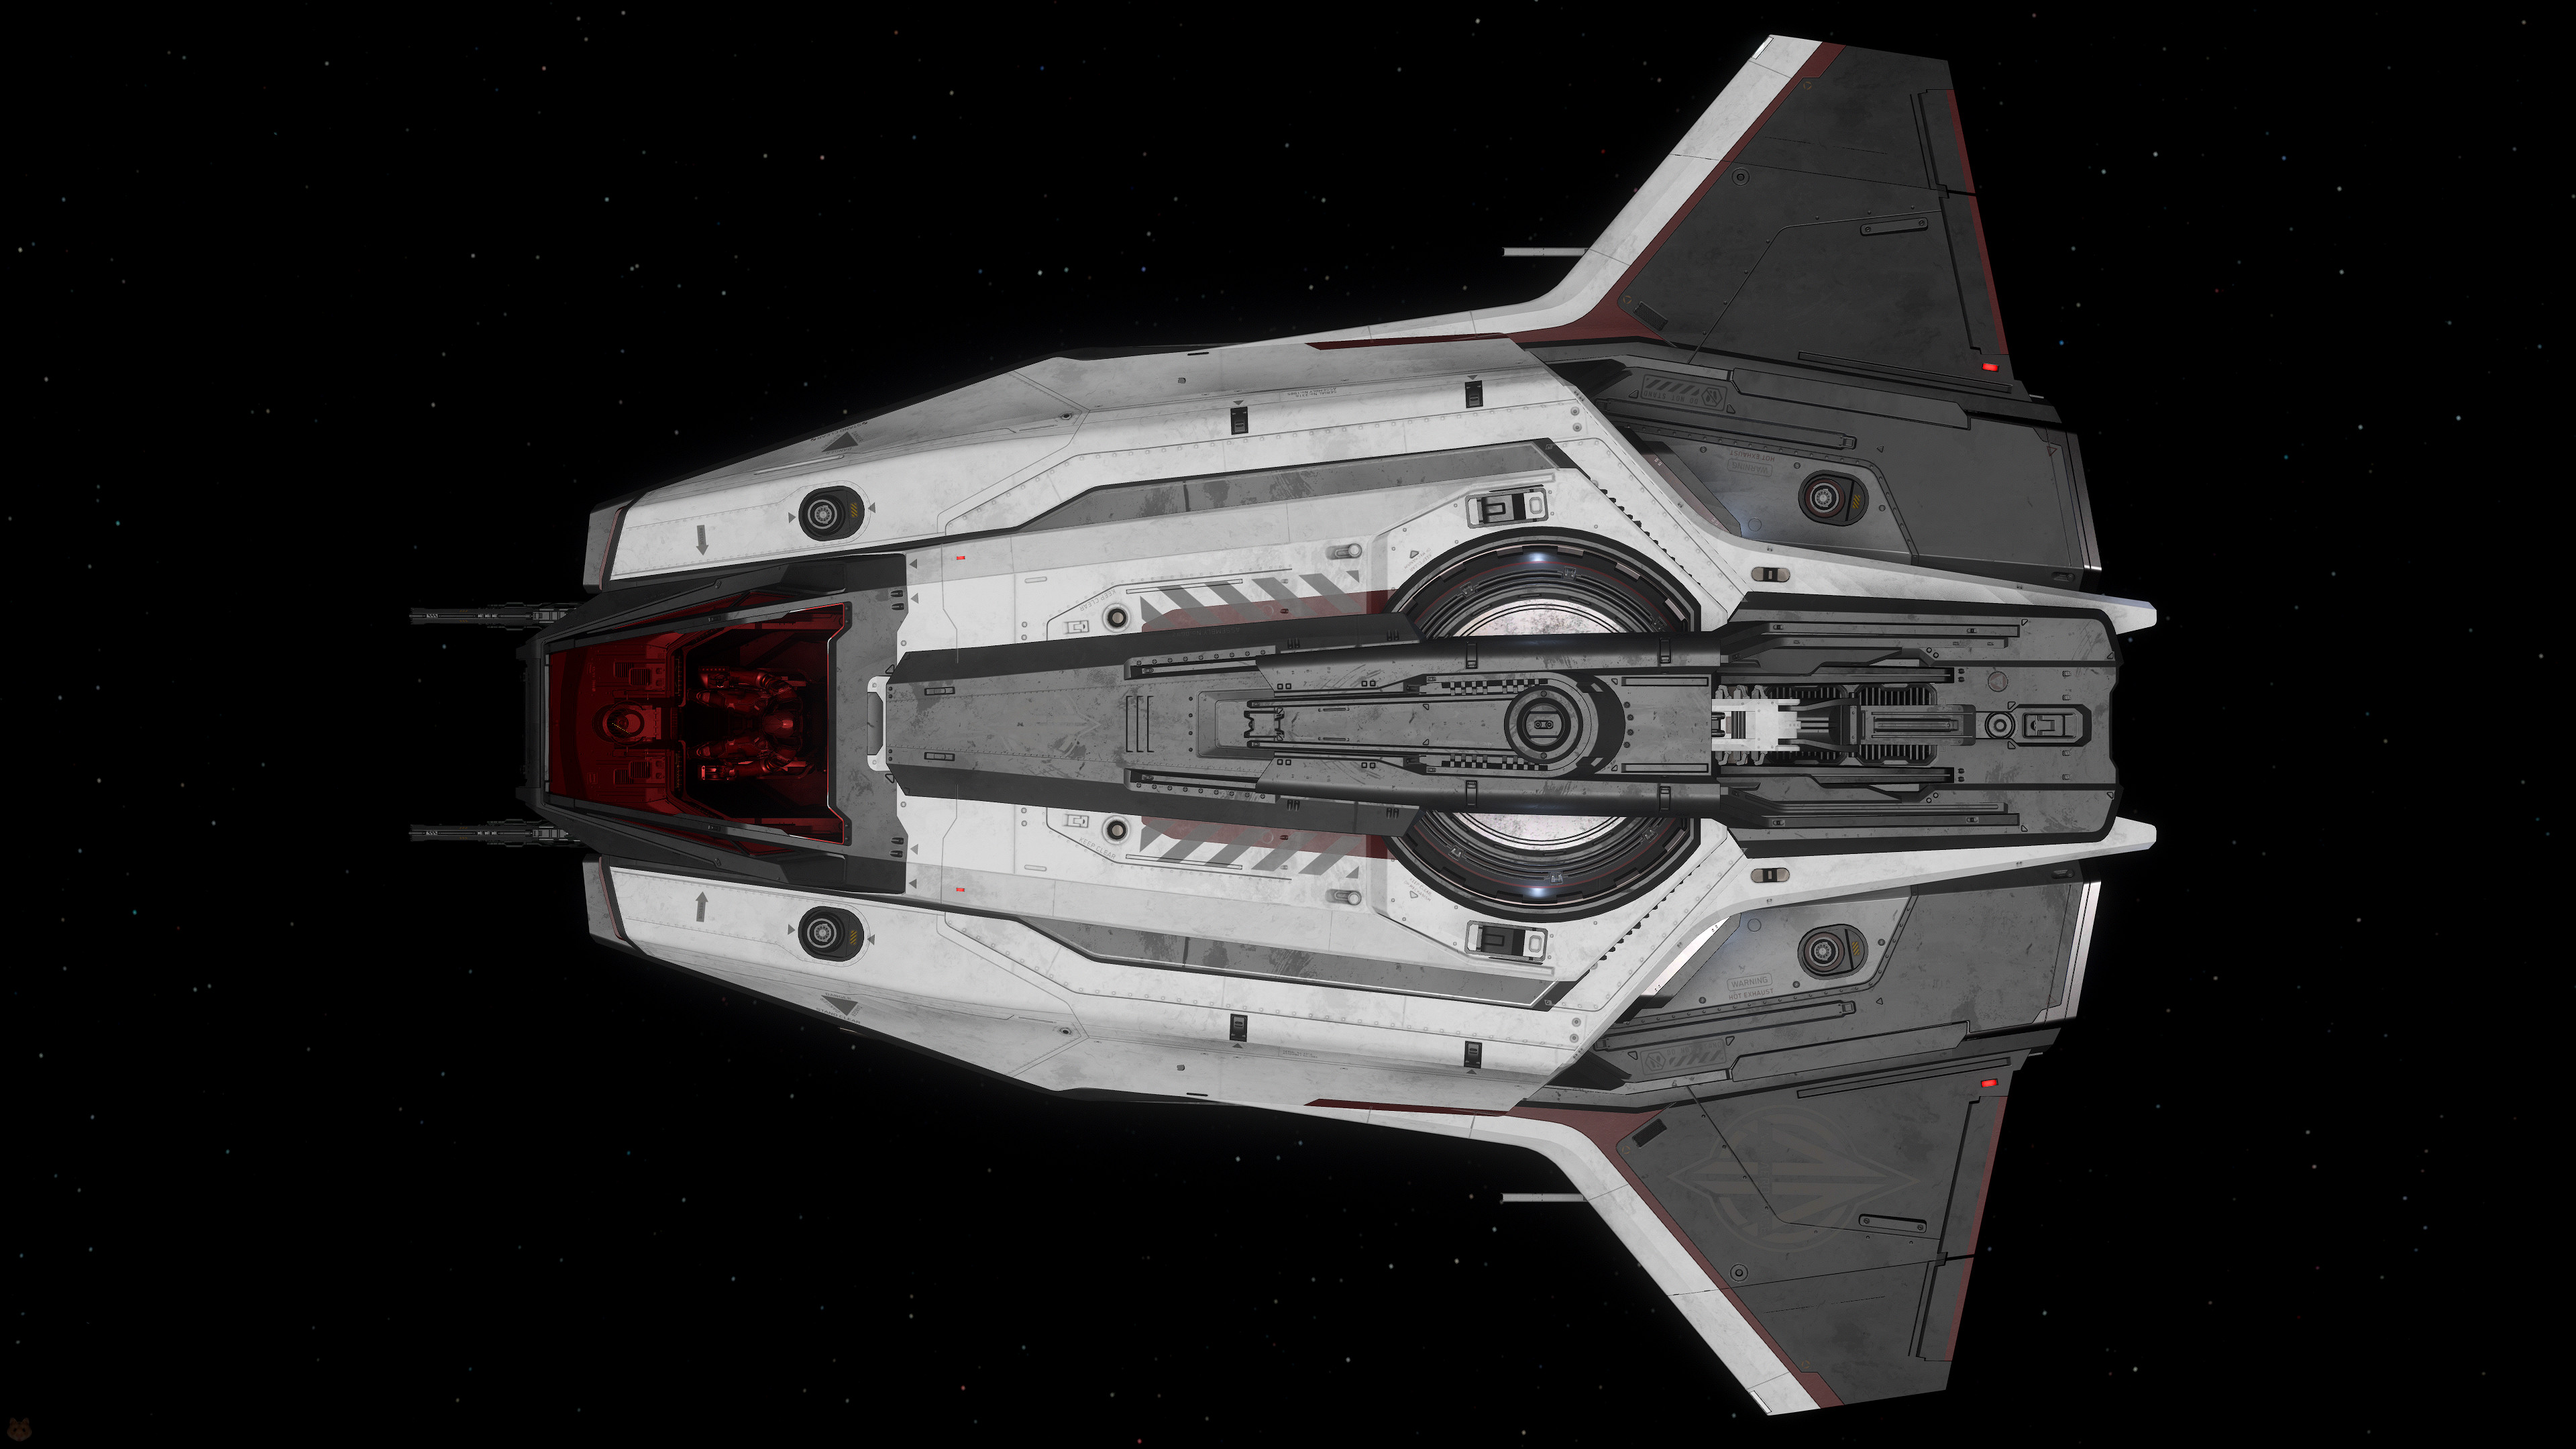 The Carrack Expedition - Roberts Space Industries  Follow the development  of Star Citizen and Squadron 42